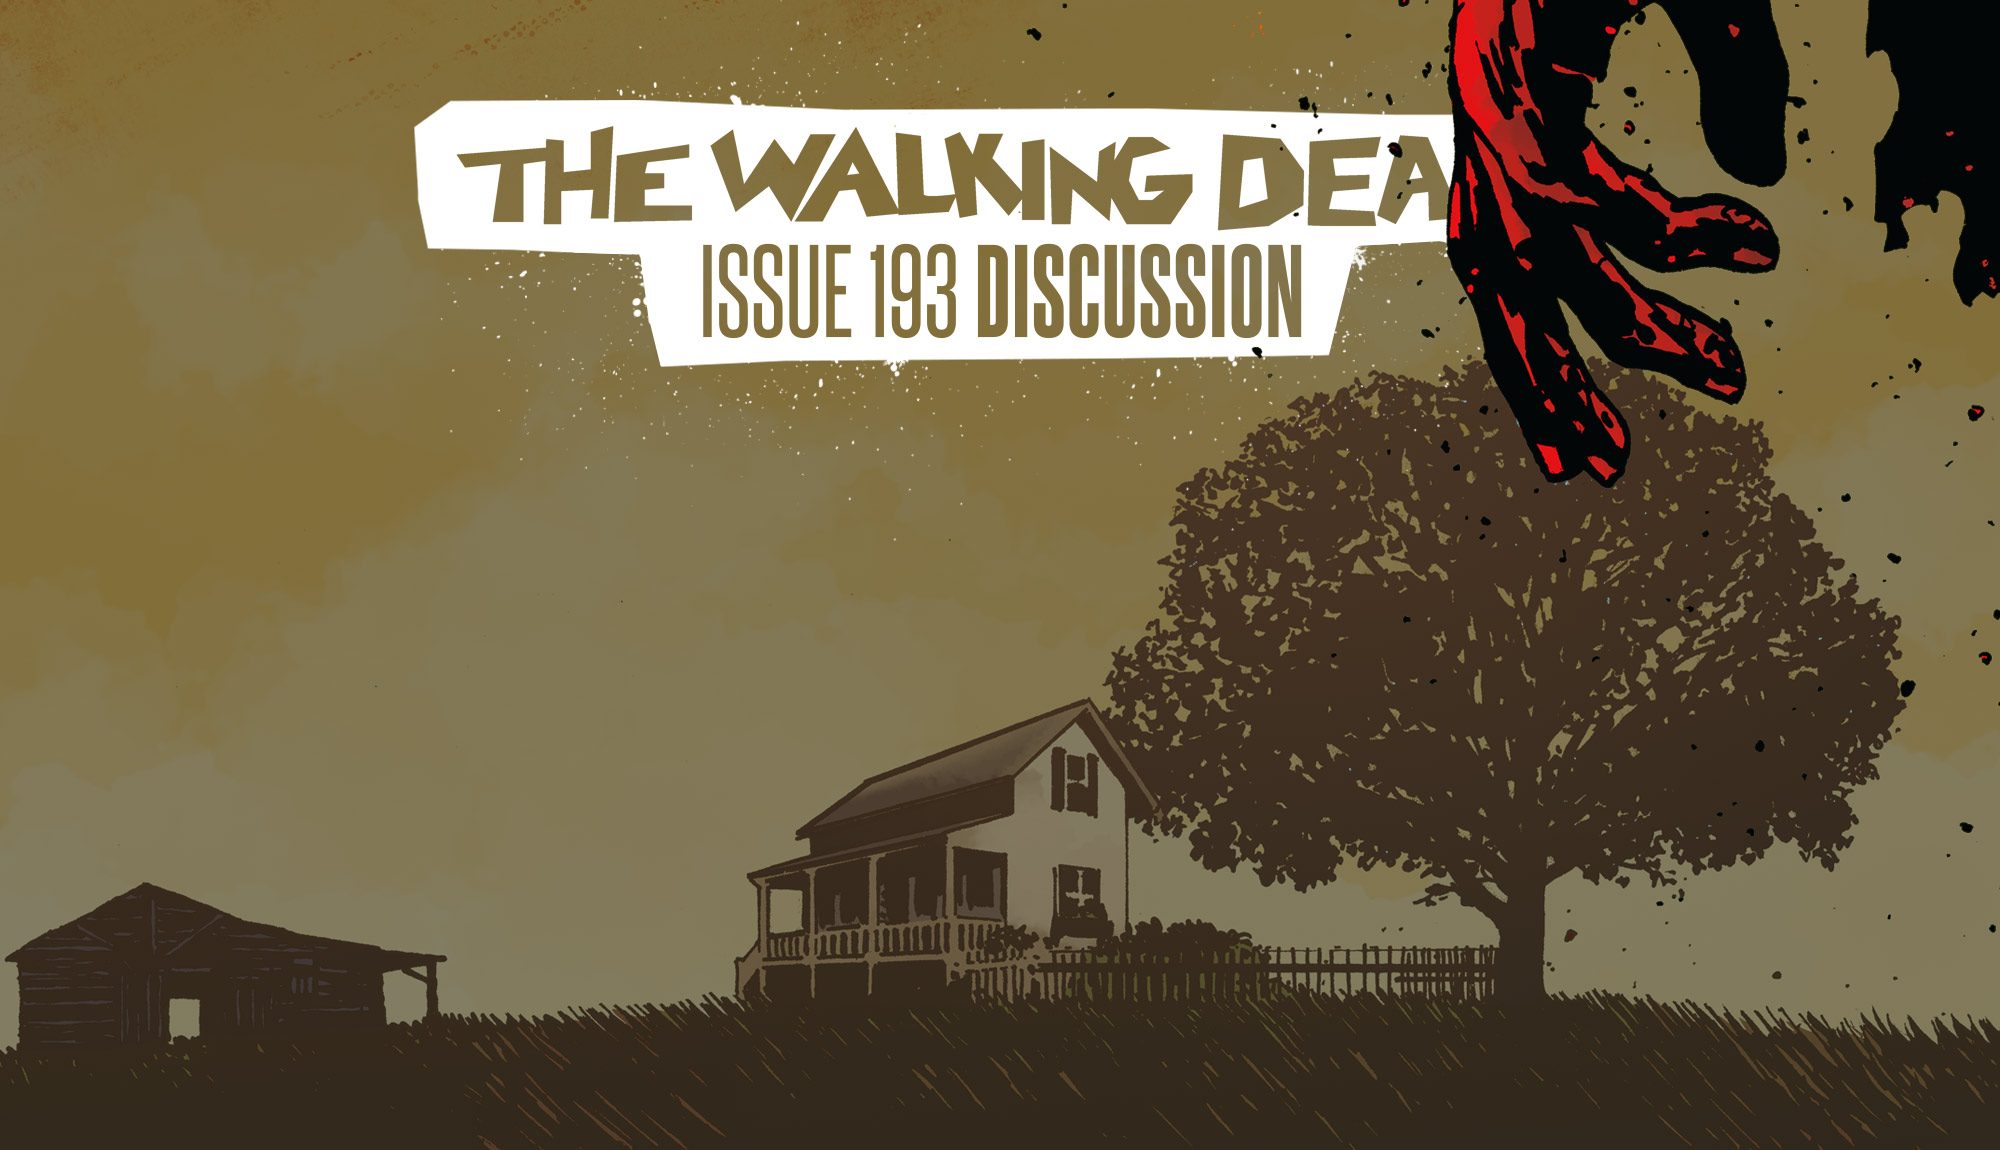 The Walking Dead Issue 193 The Farmhouse Reader Discussion - 